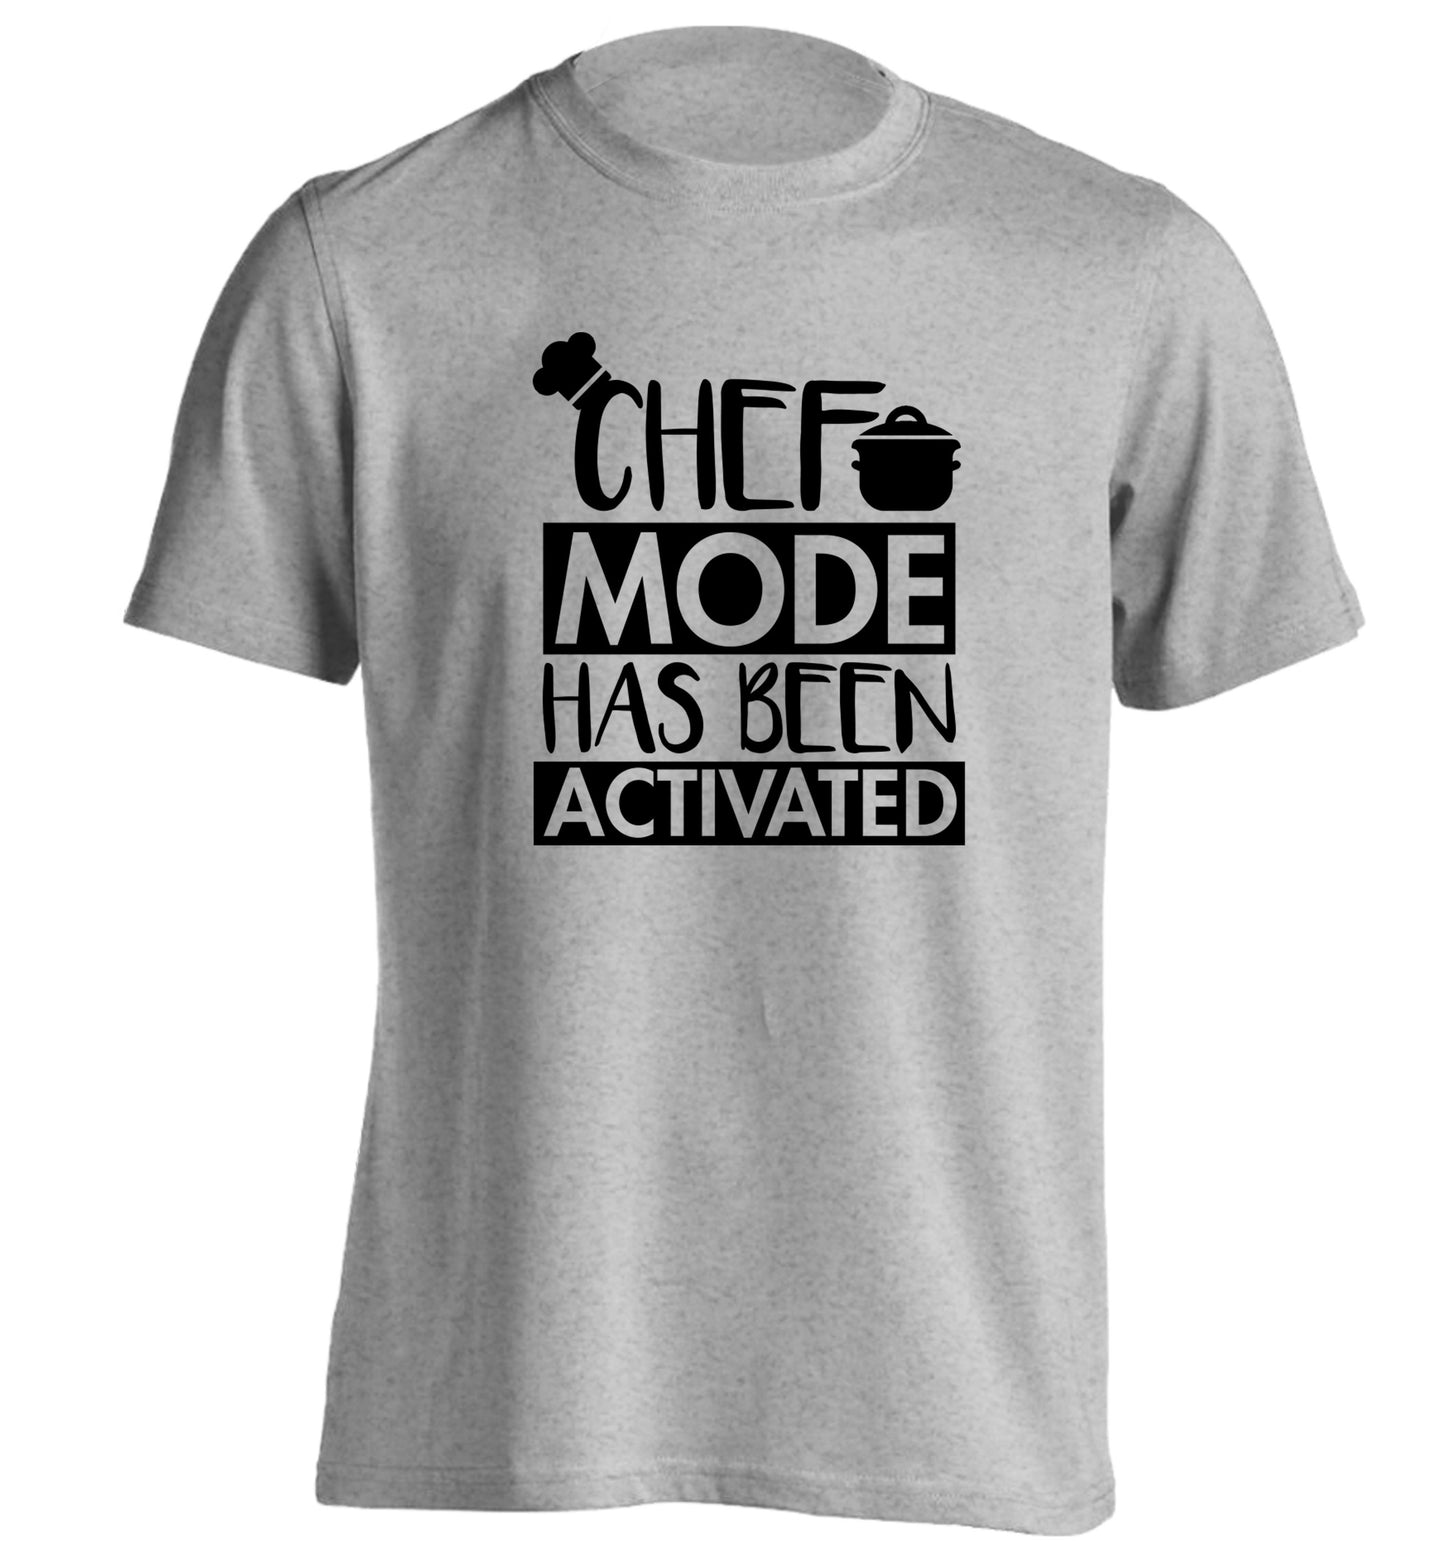 Chef mode has been activated adults unisex grey Tshirt 2XL